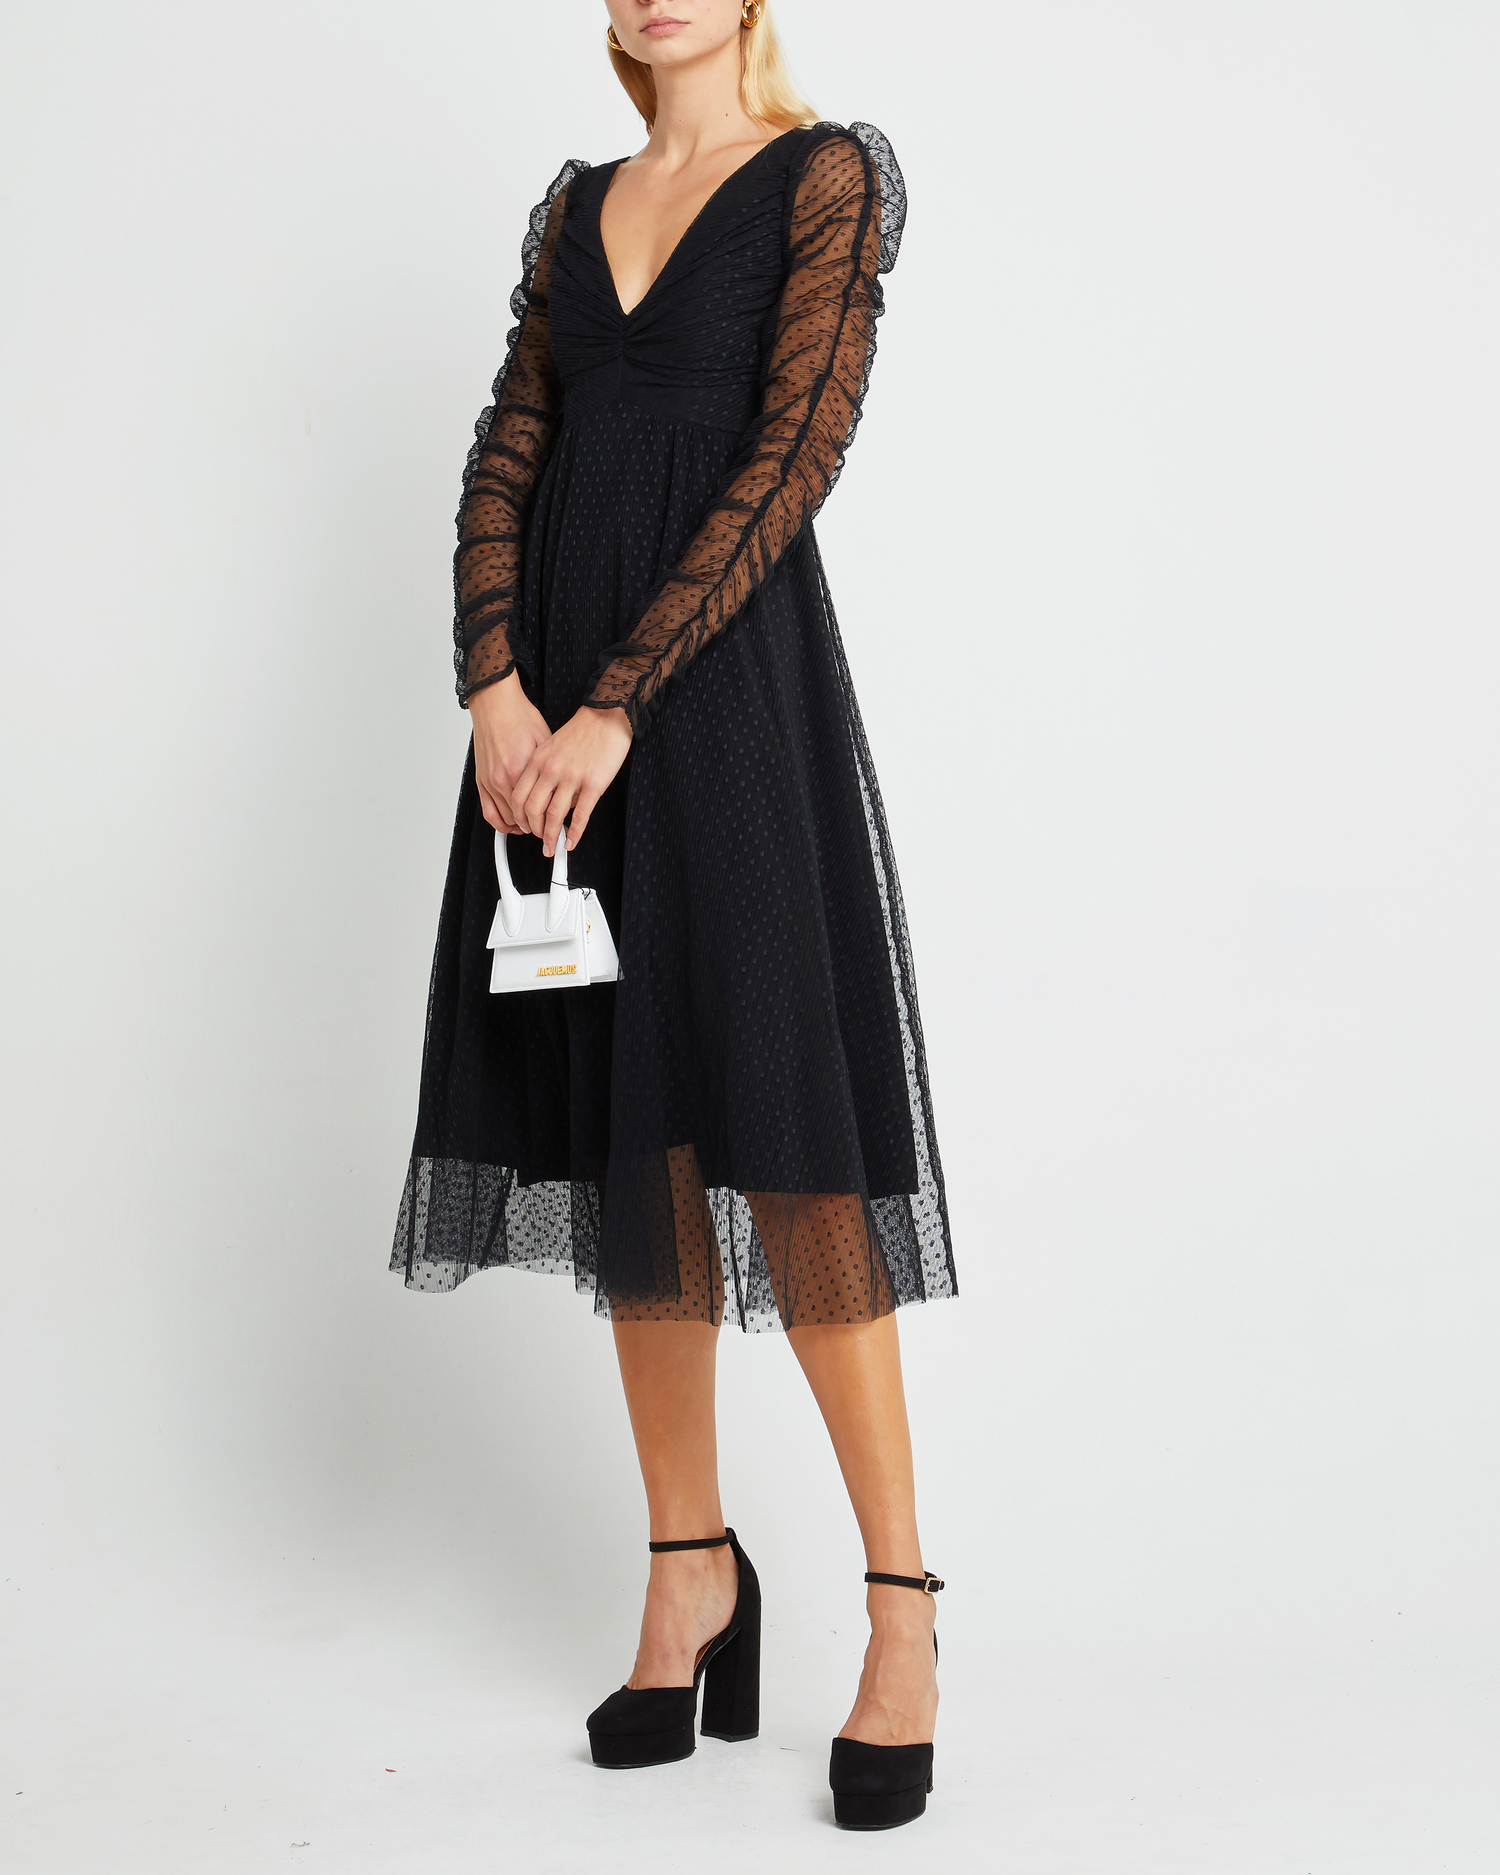 Fifth image of Daisy Dress, a black wedding guest dress with sheer long sleeves, v-neckline, ruched gathered bust detail, cinched waist, lining, dotted mesh fabric, and back zipper